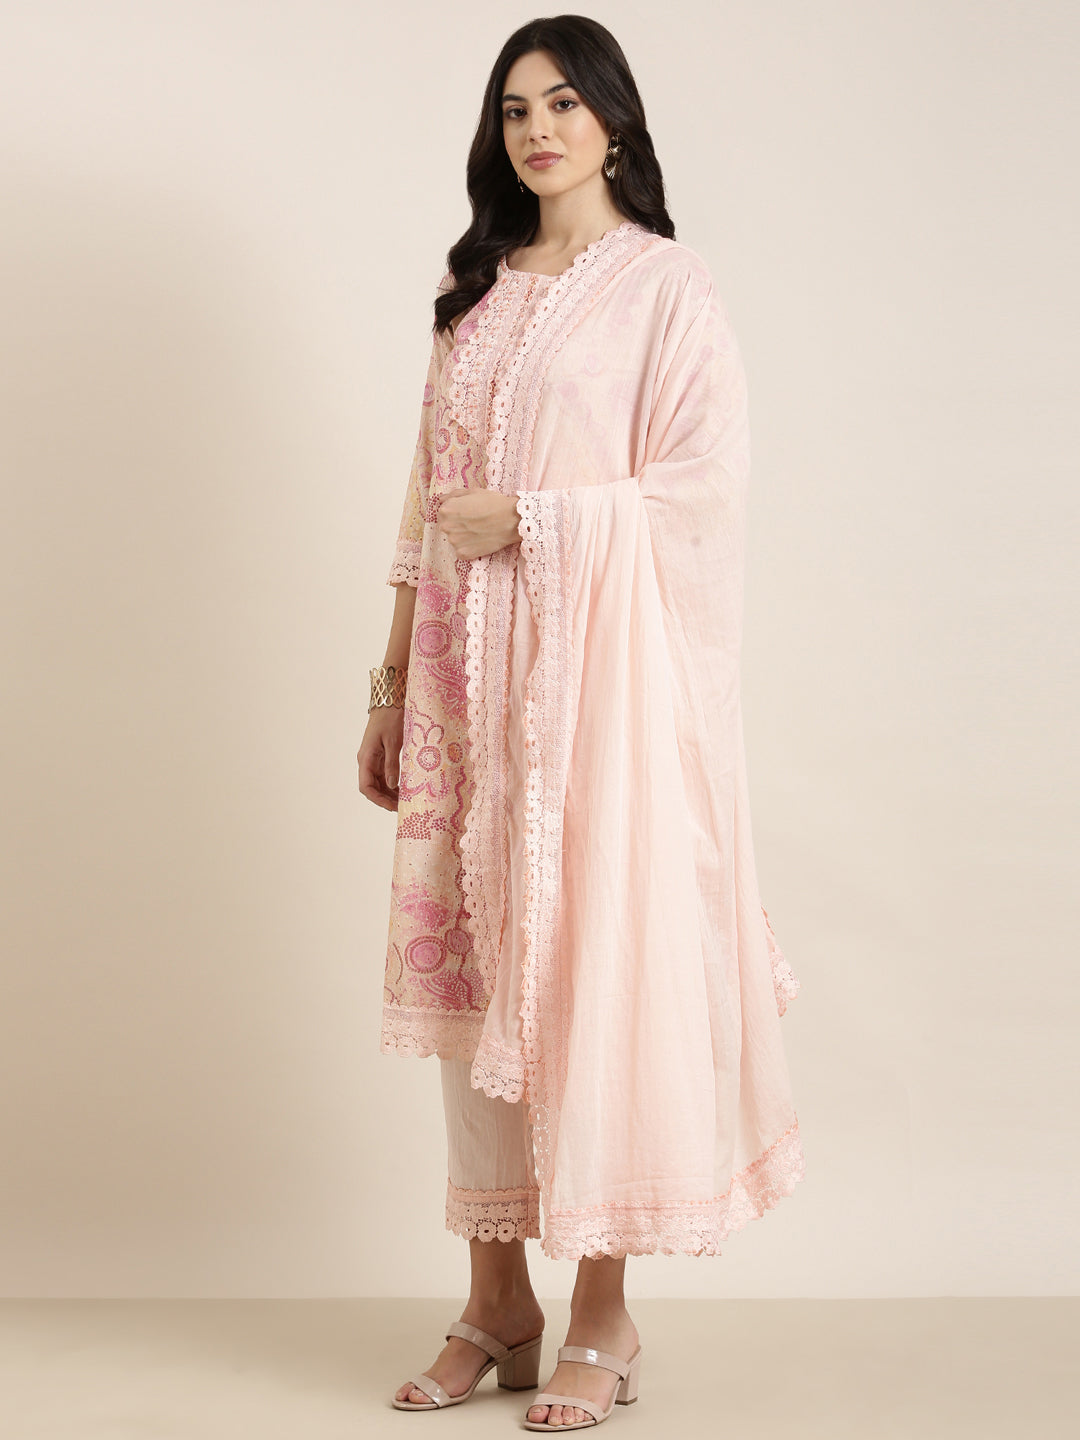 Women Straight Peach Floral Kurta and Trousers Set Comes With Dupatta